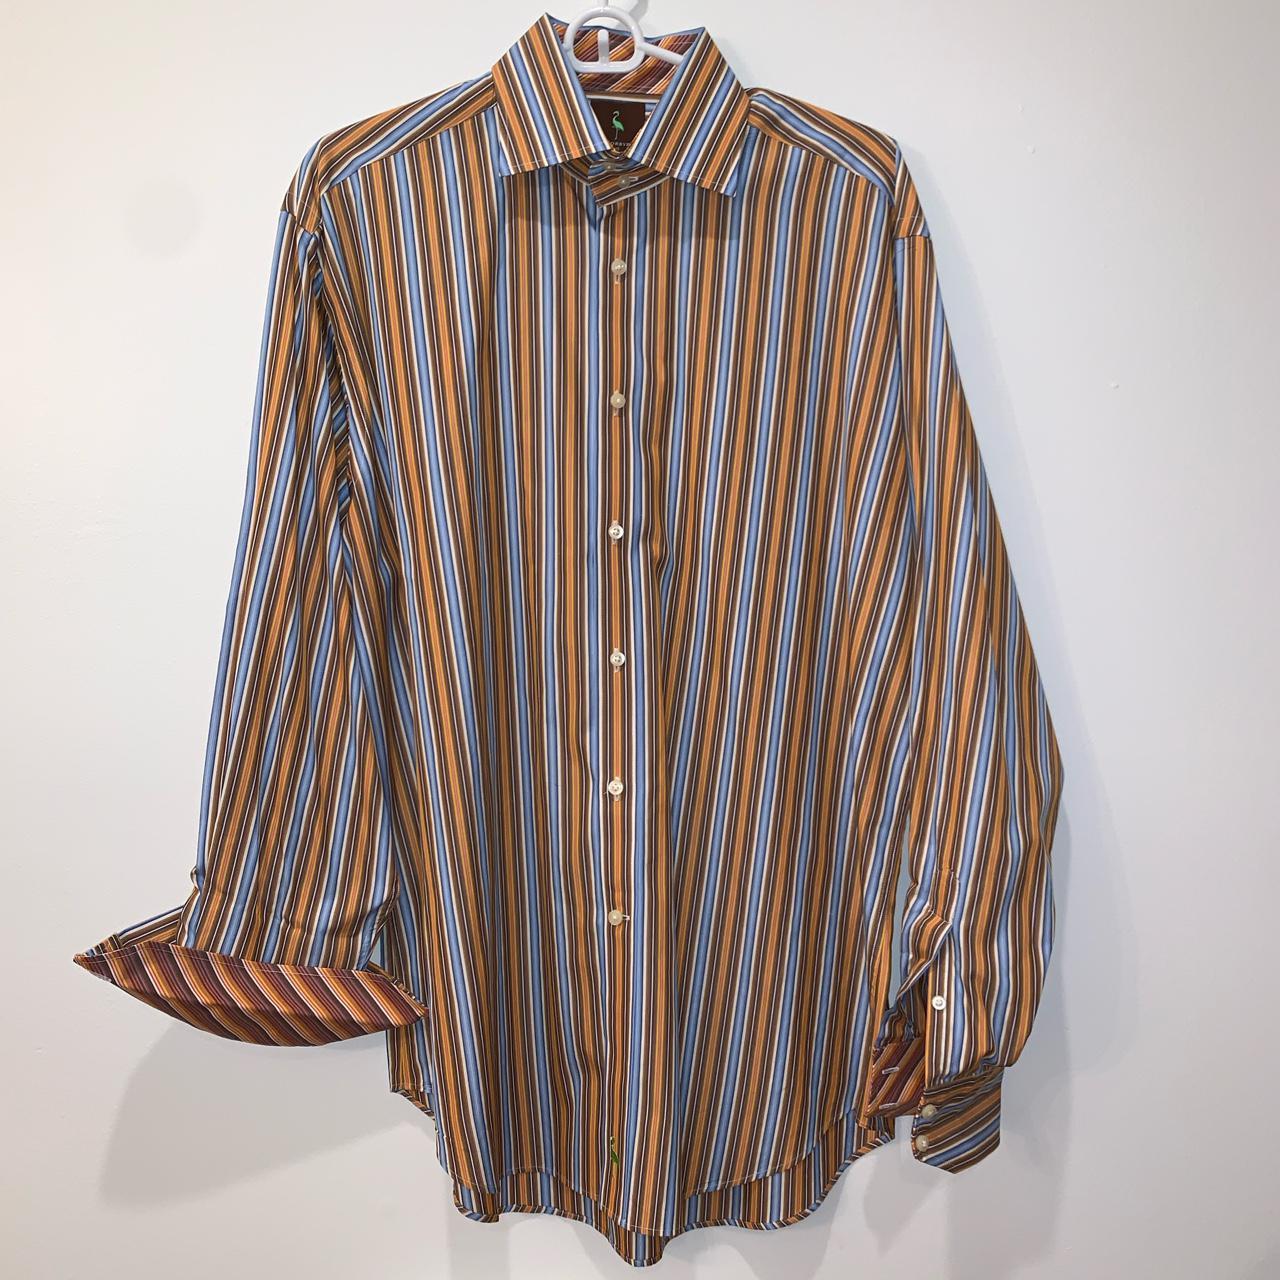 Product Image 2 - TailorByrd Long Sleeve Men’s Button-Down